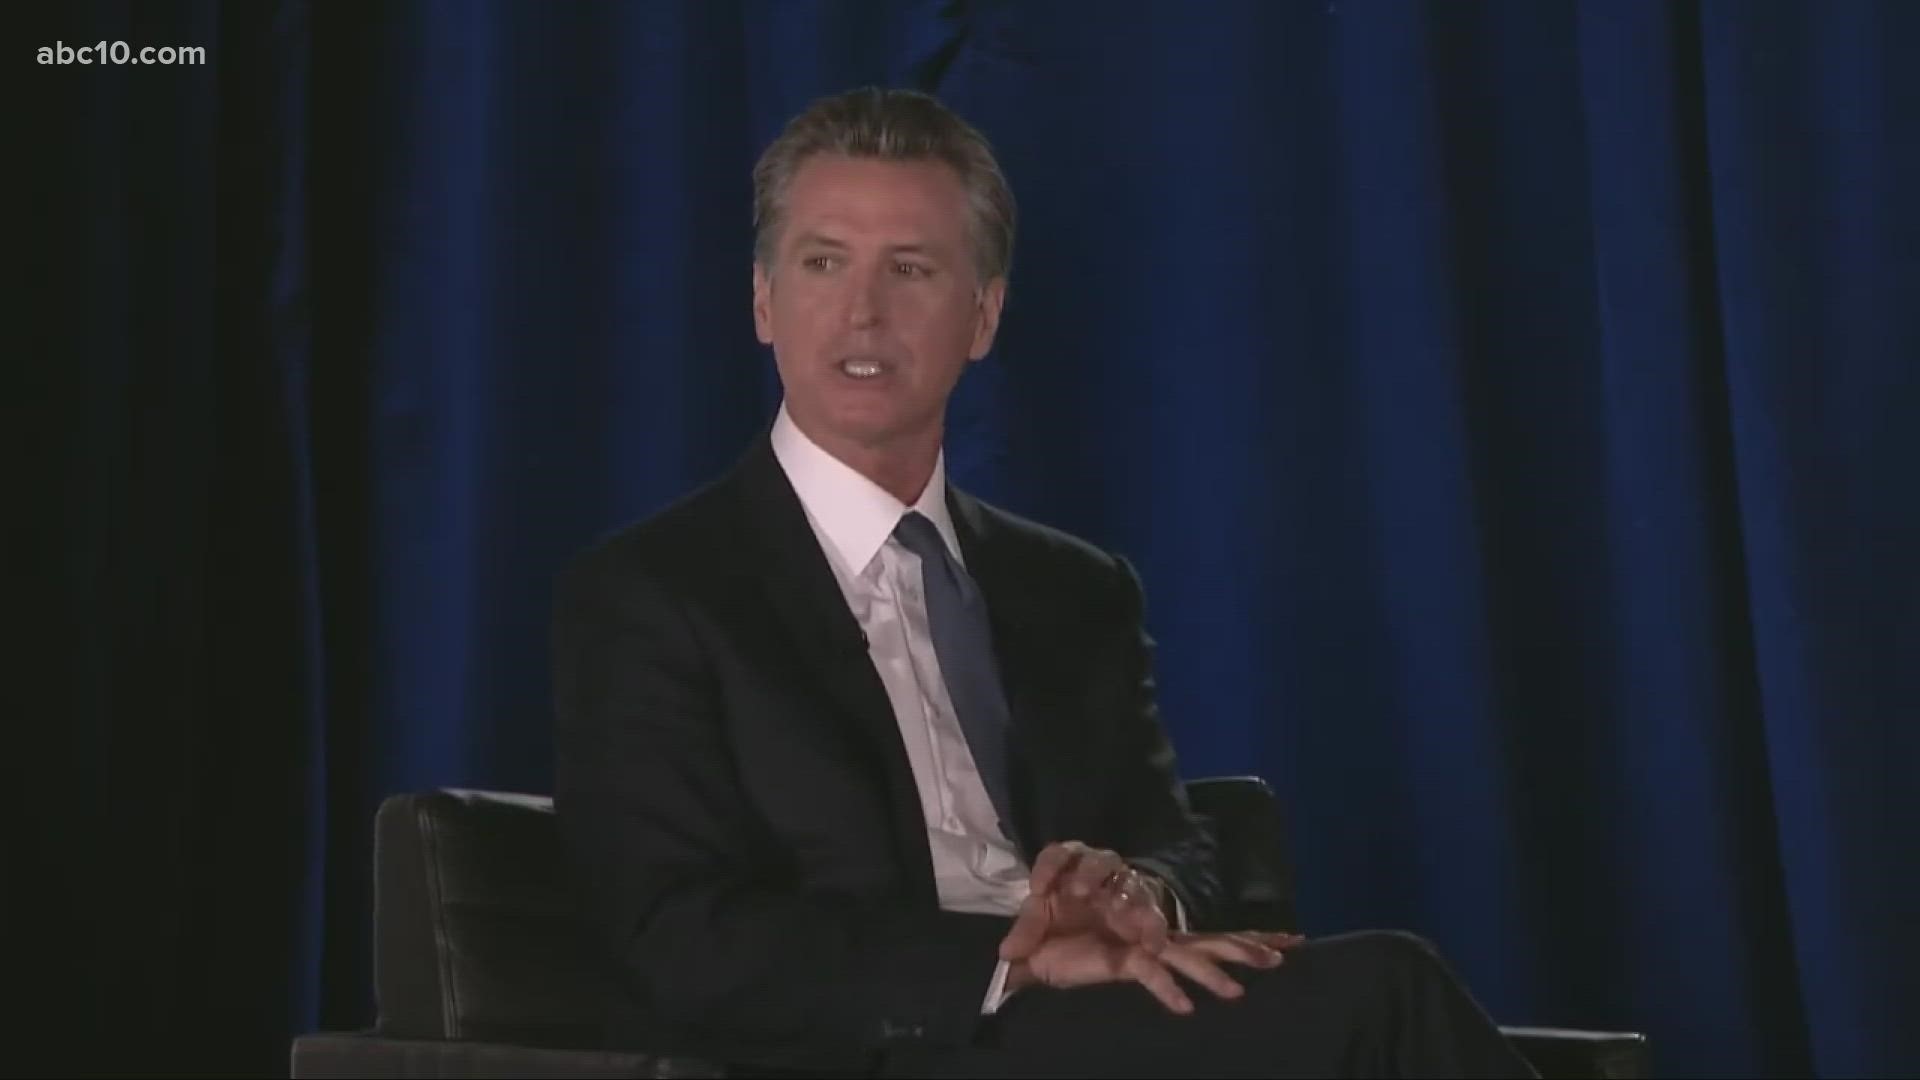 During his one-on-one interview at the summit, Newsom explained his rare hiatus from public view and said he canceled a trip to an international climate conference.